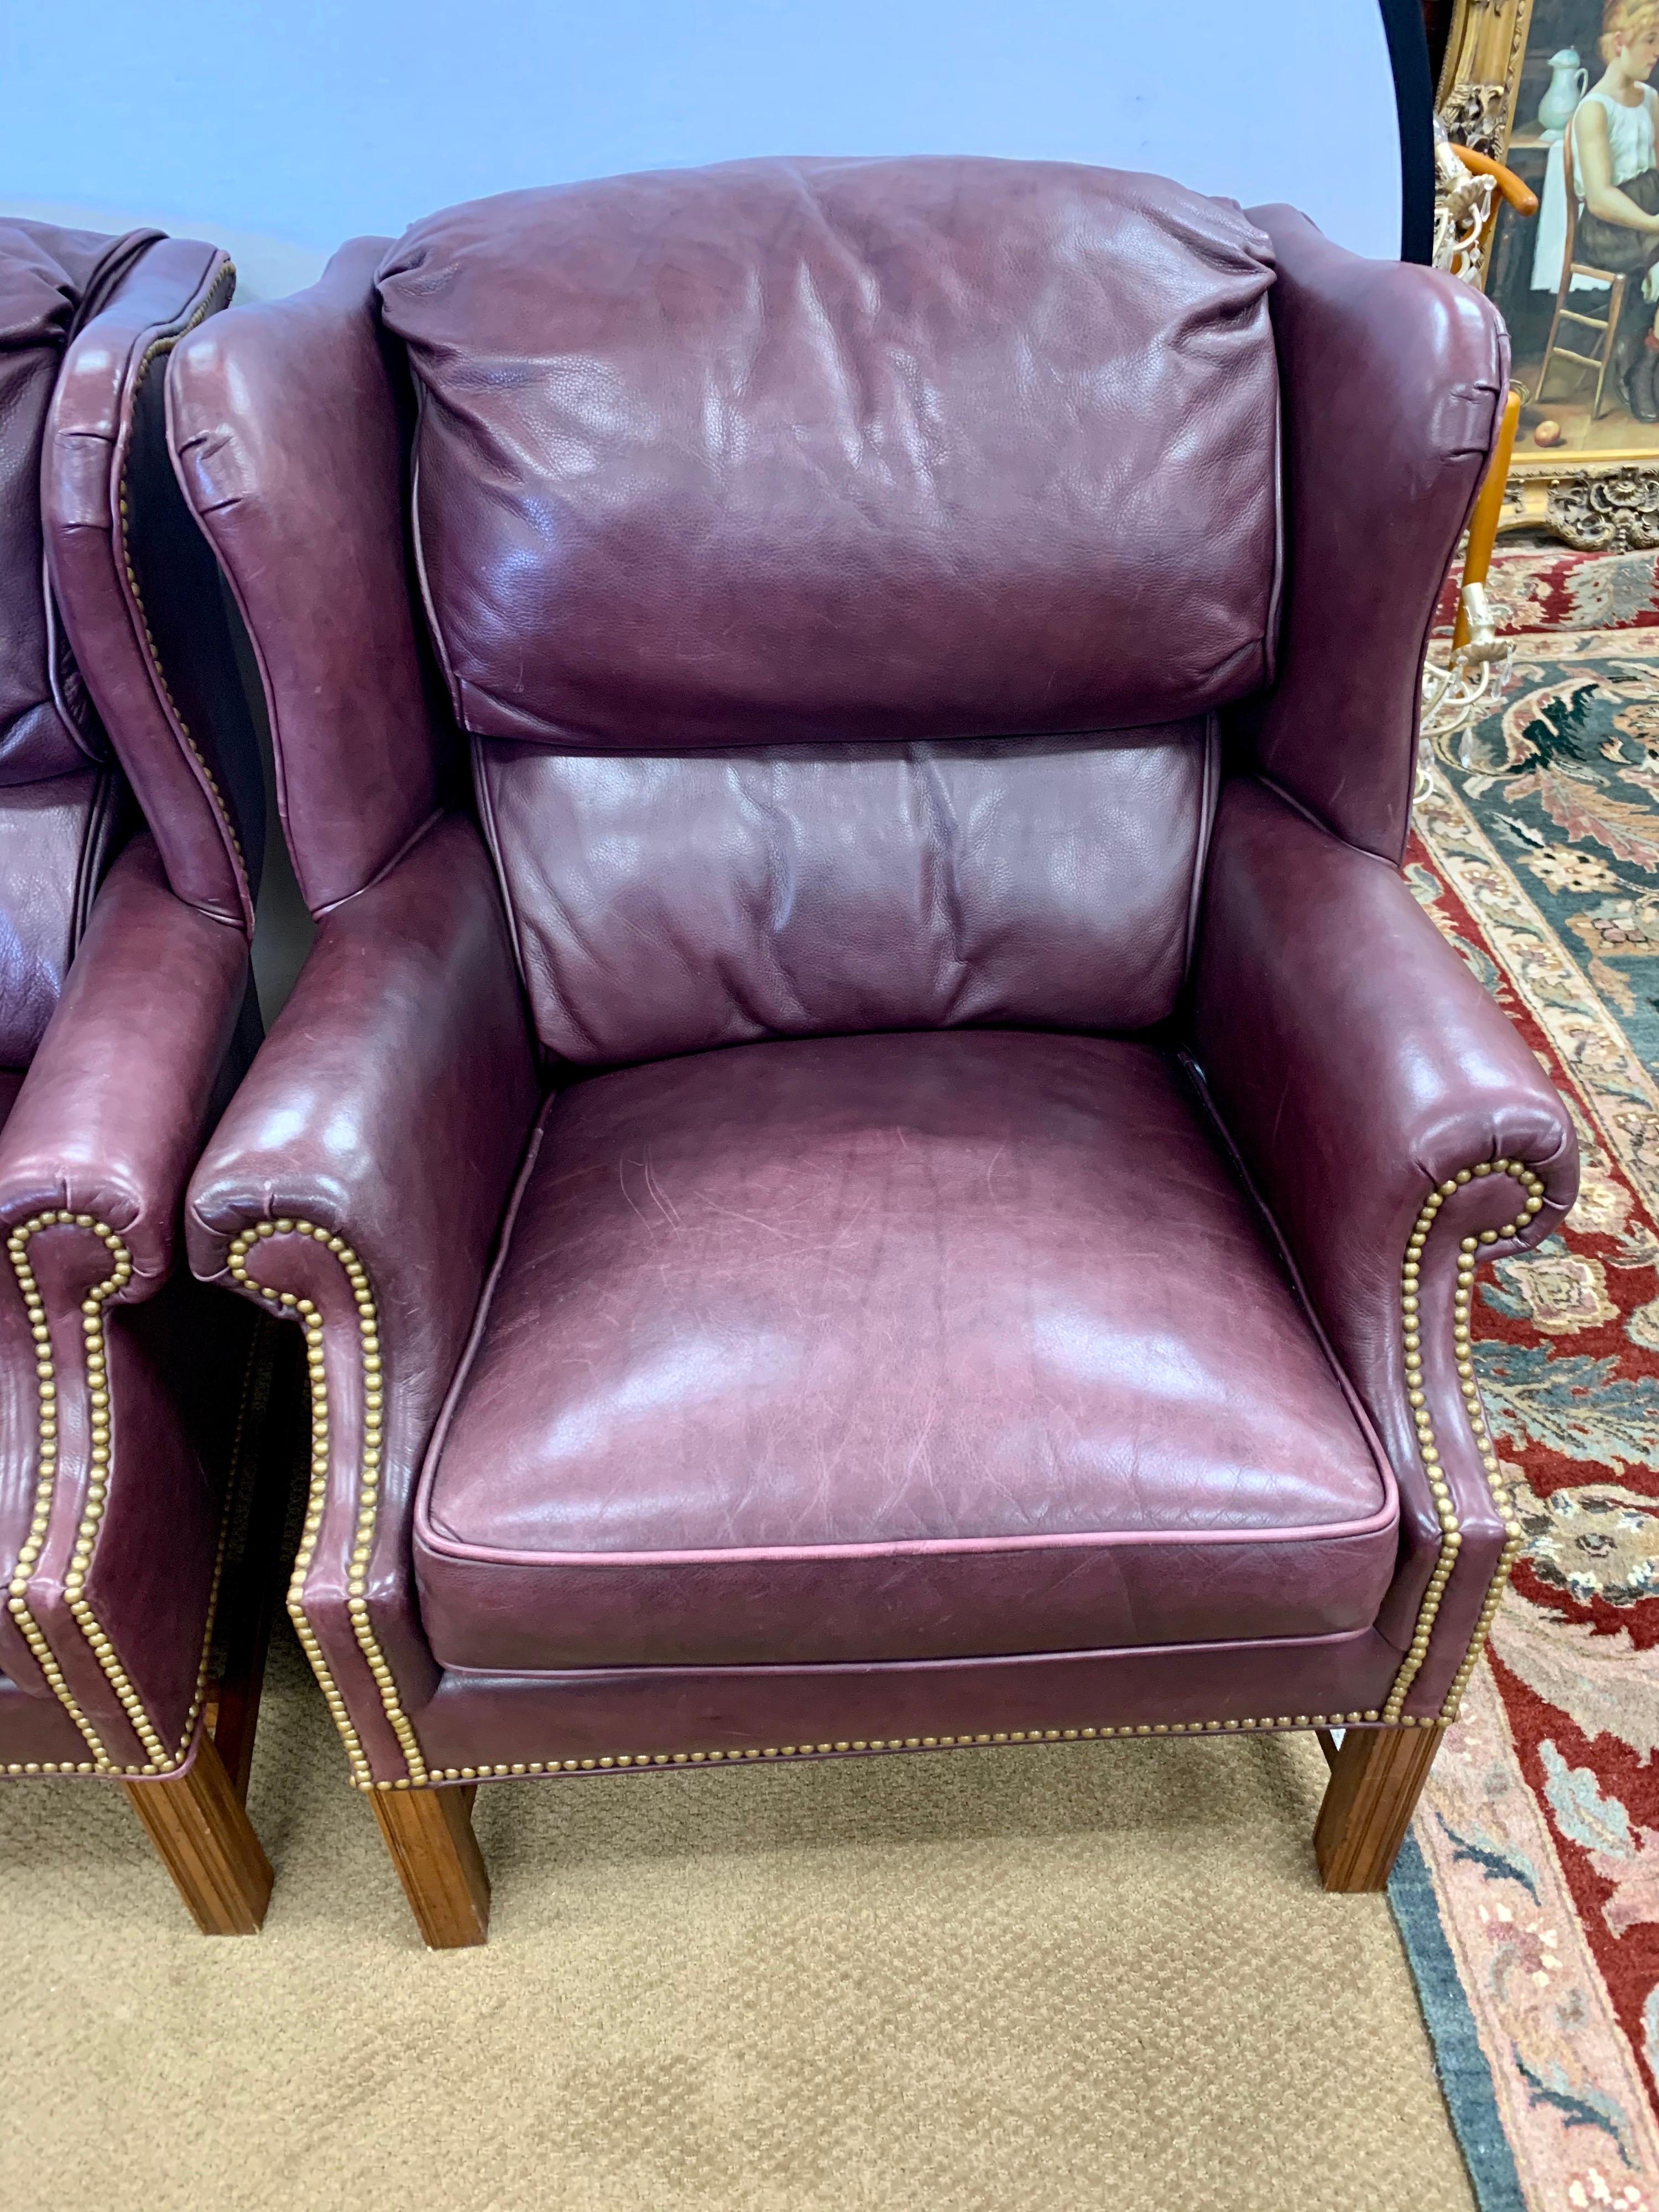 Grand, welcoming and wonderful leather wingback club chairs from the late 20th century, by Bernhardt. In the manner of George III. Having mahogany legs with carvings throughout. Gorgeous merlot leather and brass nailhead accents. These elegant